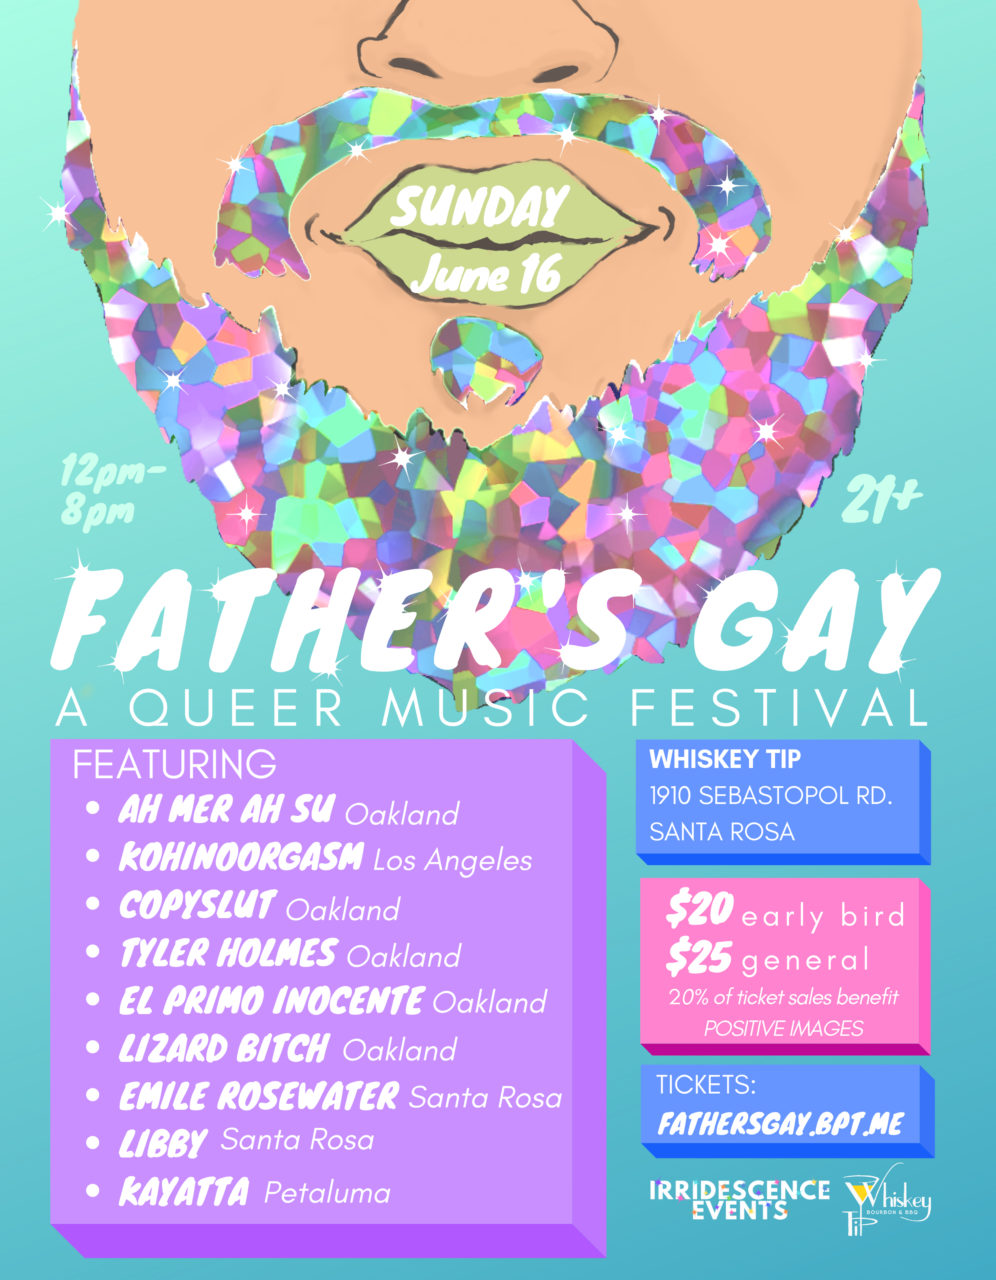 the Father's Gay poster had a daddy with a glittery beard and listed the performers, like Ah Mer Ah Su, Kohinoorgasm, Copyslut, and Tyler Holmes.